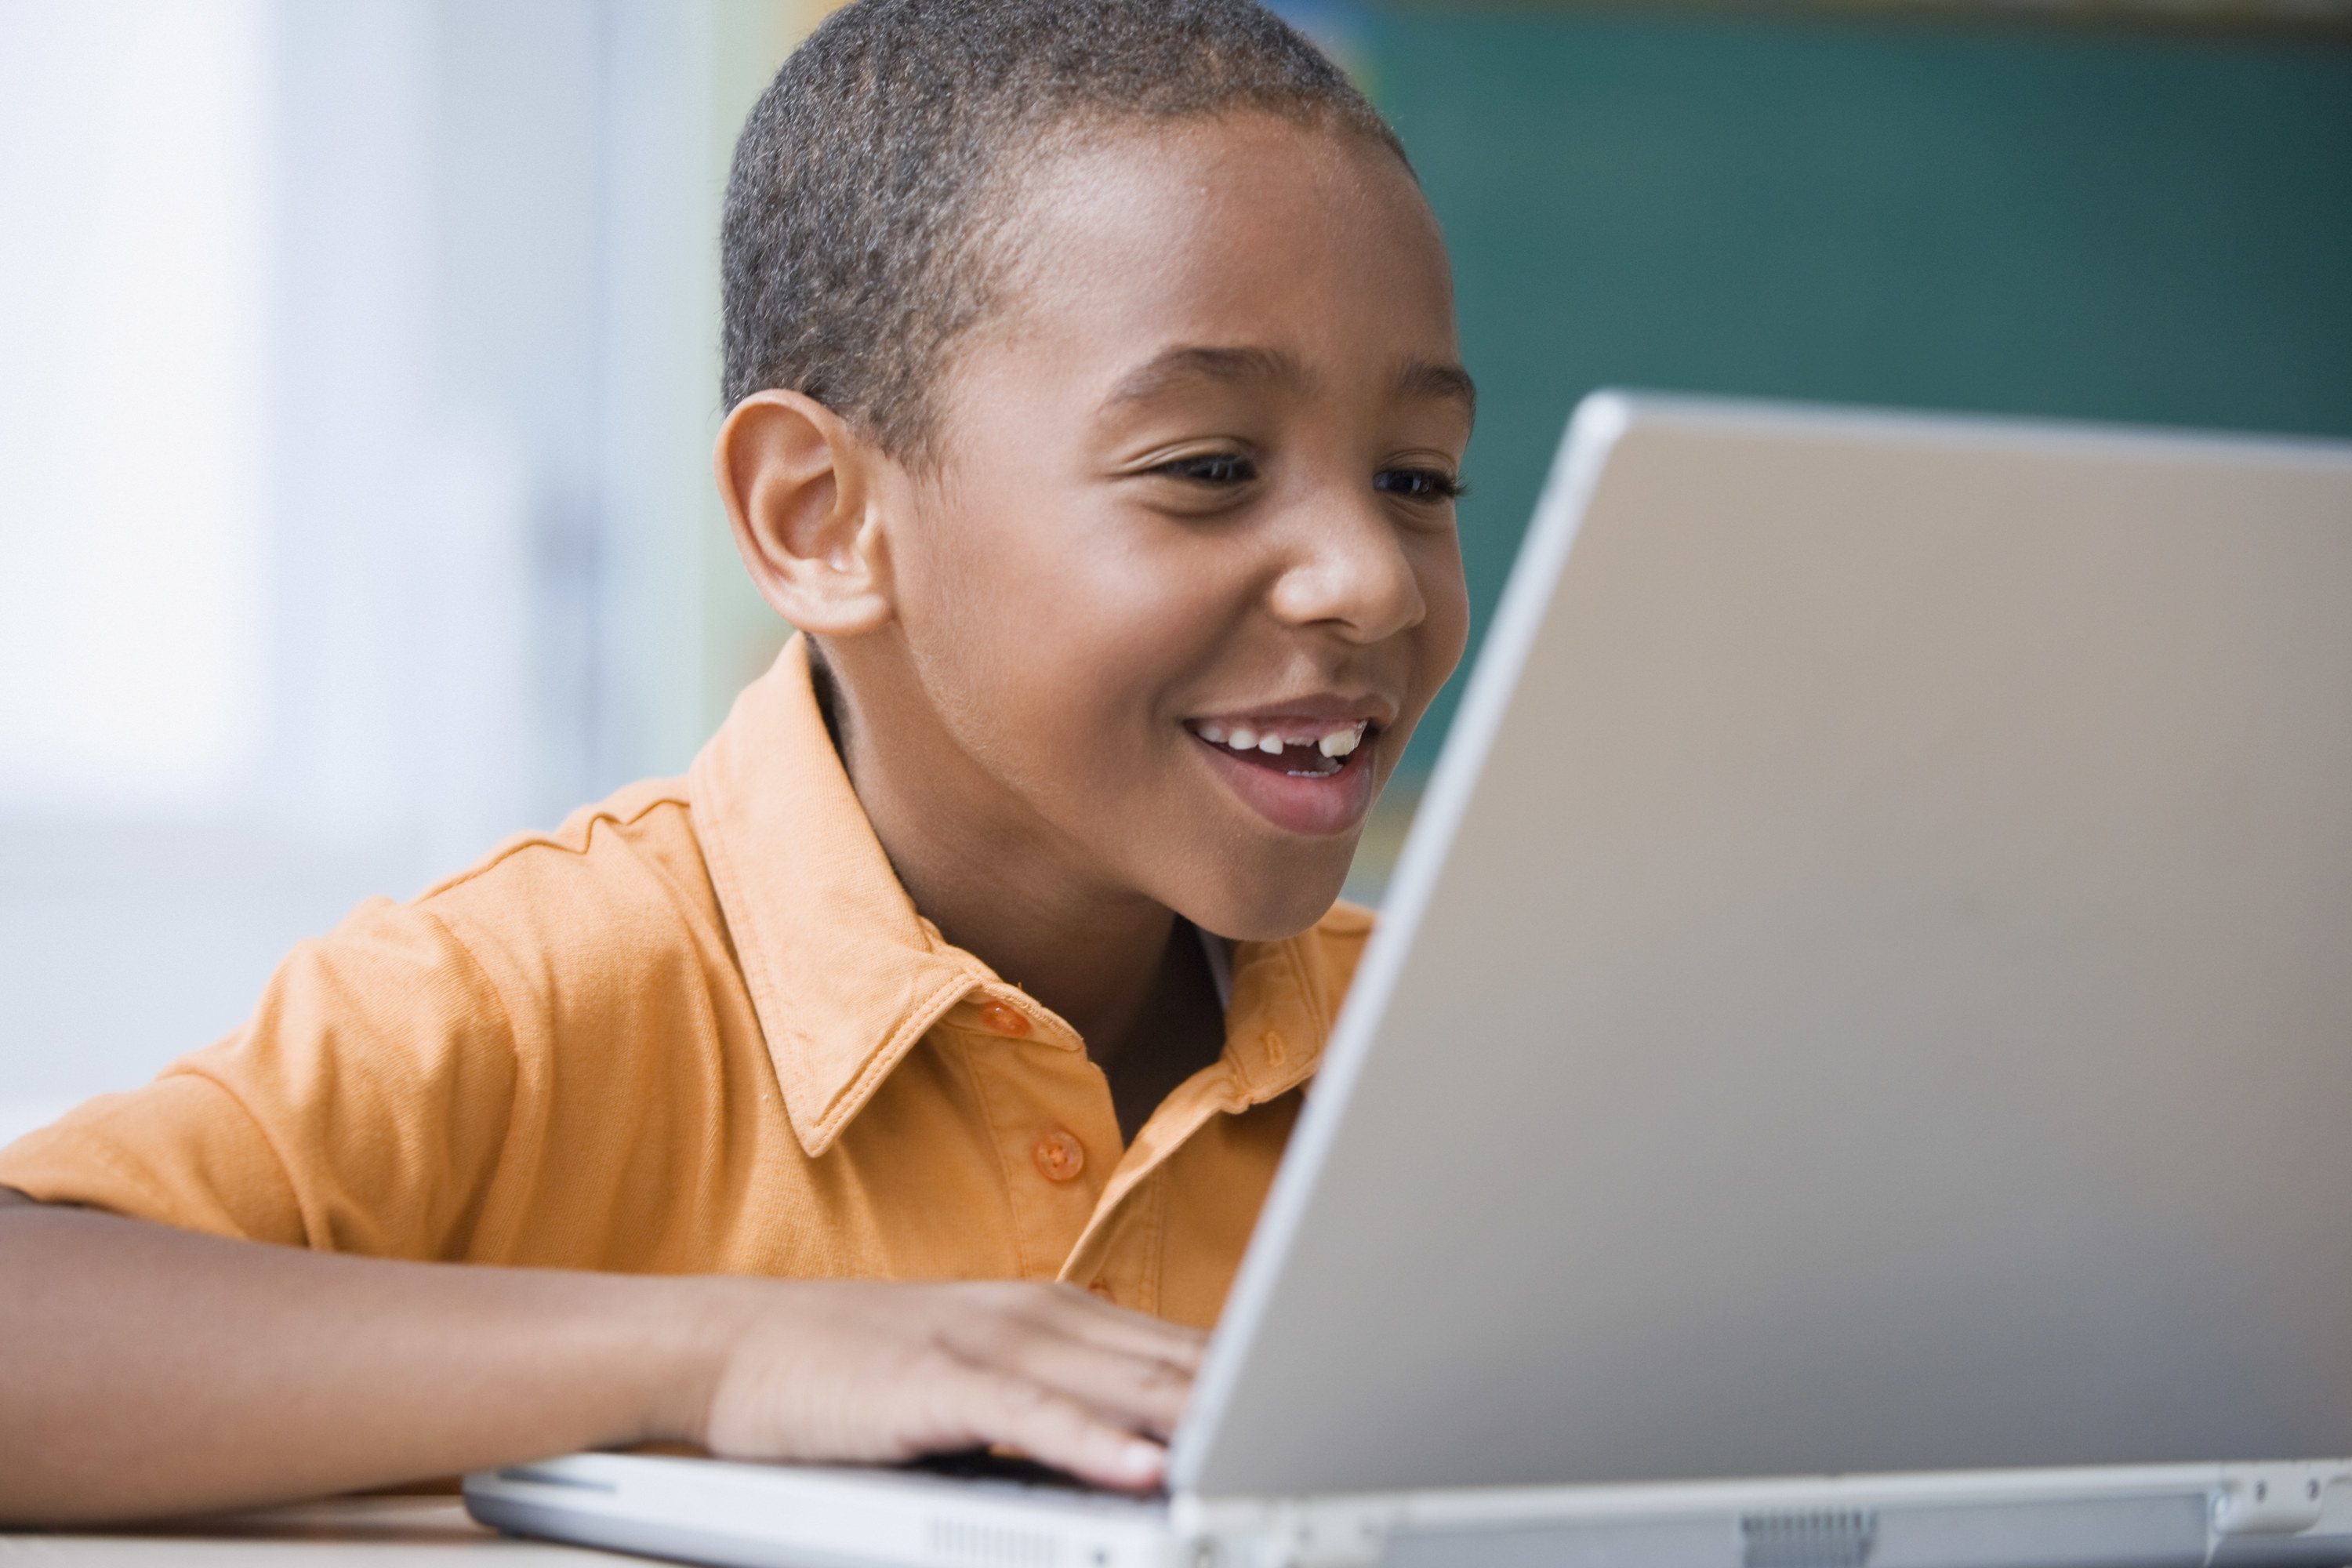 A kid smiles while playing on a laptop